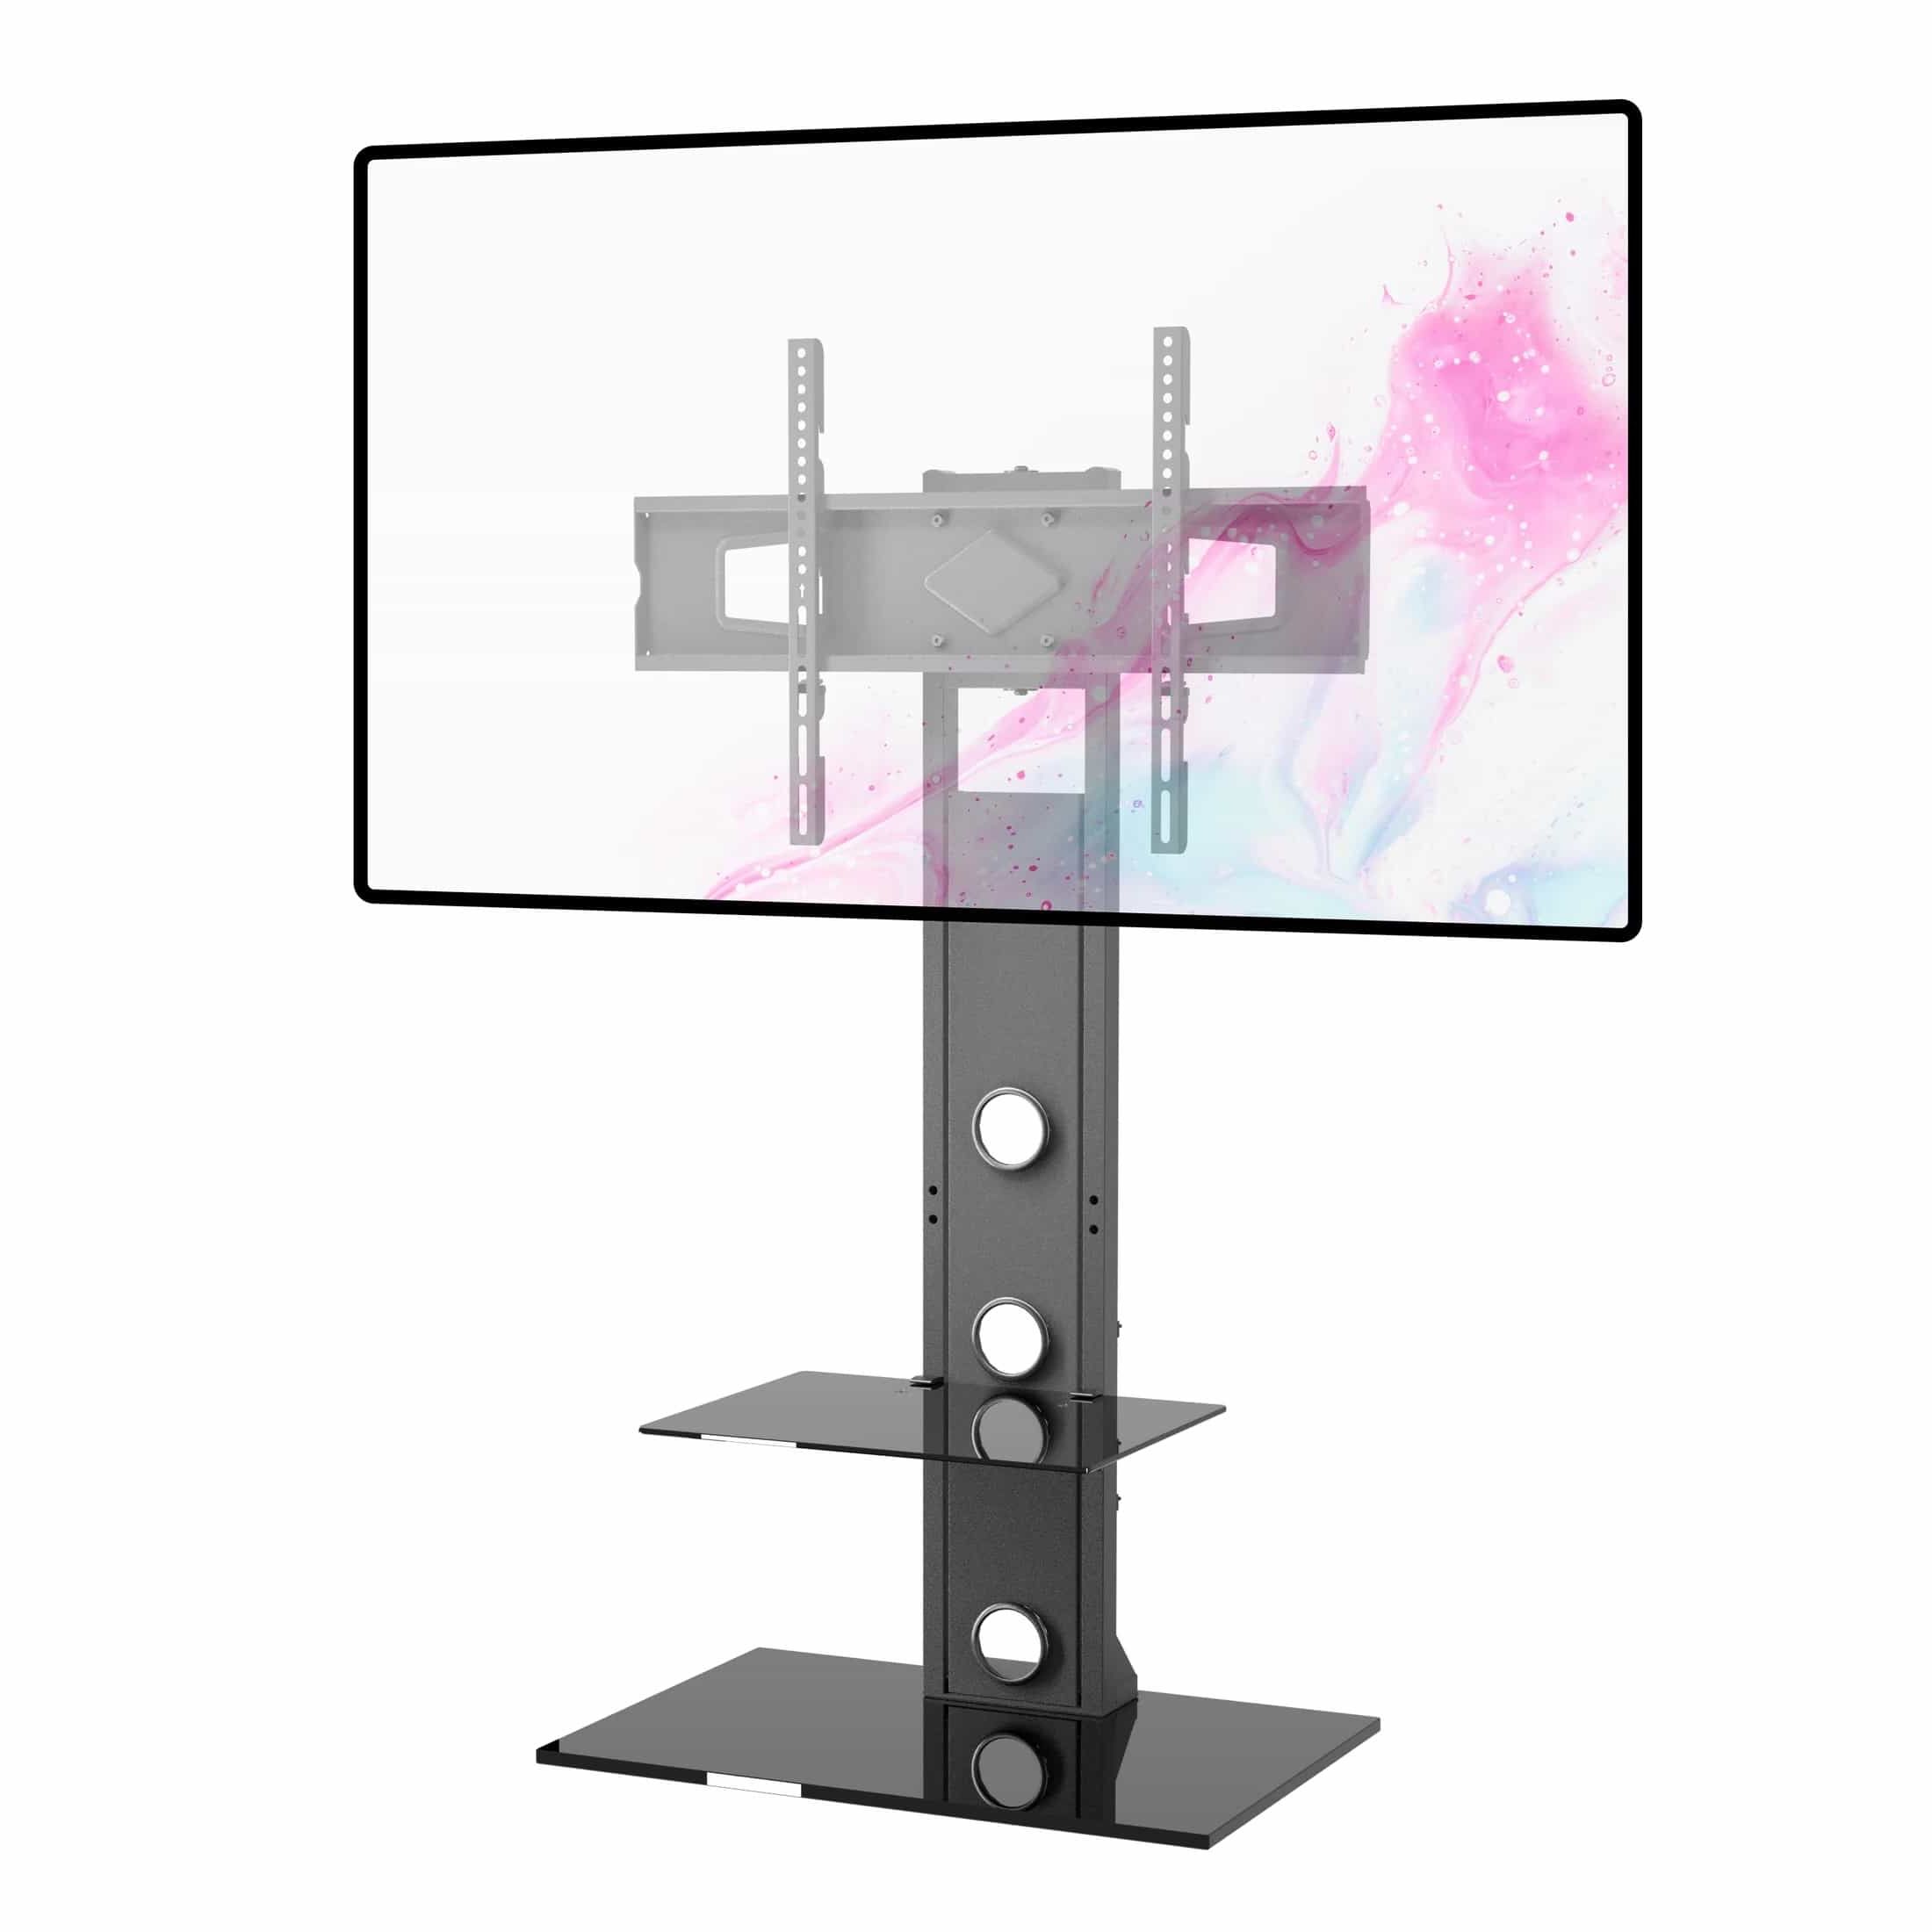 Promounts Universal Swivel Floor Tv Stand Mount For 37 72 Inch Screens With  Adjustable Av Shelf (atmss6401 X2) Throughout Universal Floor Tv Stands (View 14 of 20)